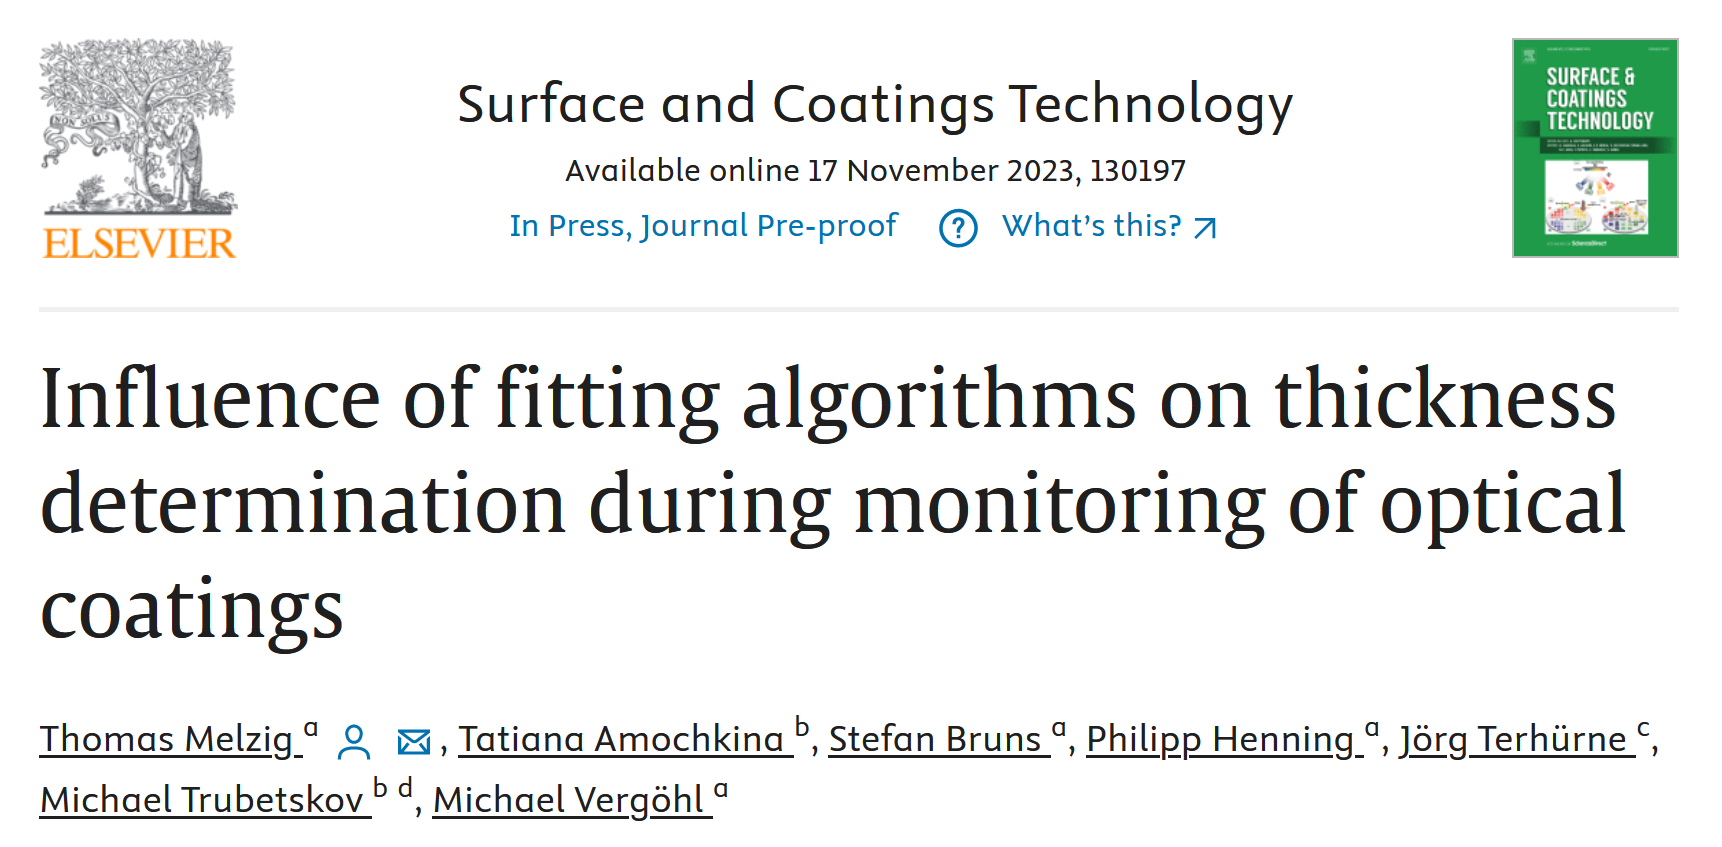 Influence of fitting algorithms on thickness determination during monitoring of optical coatings